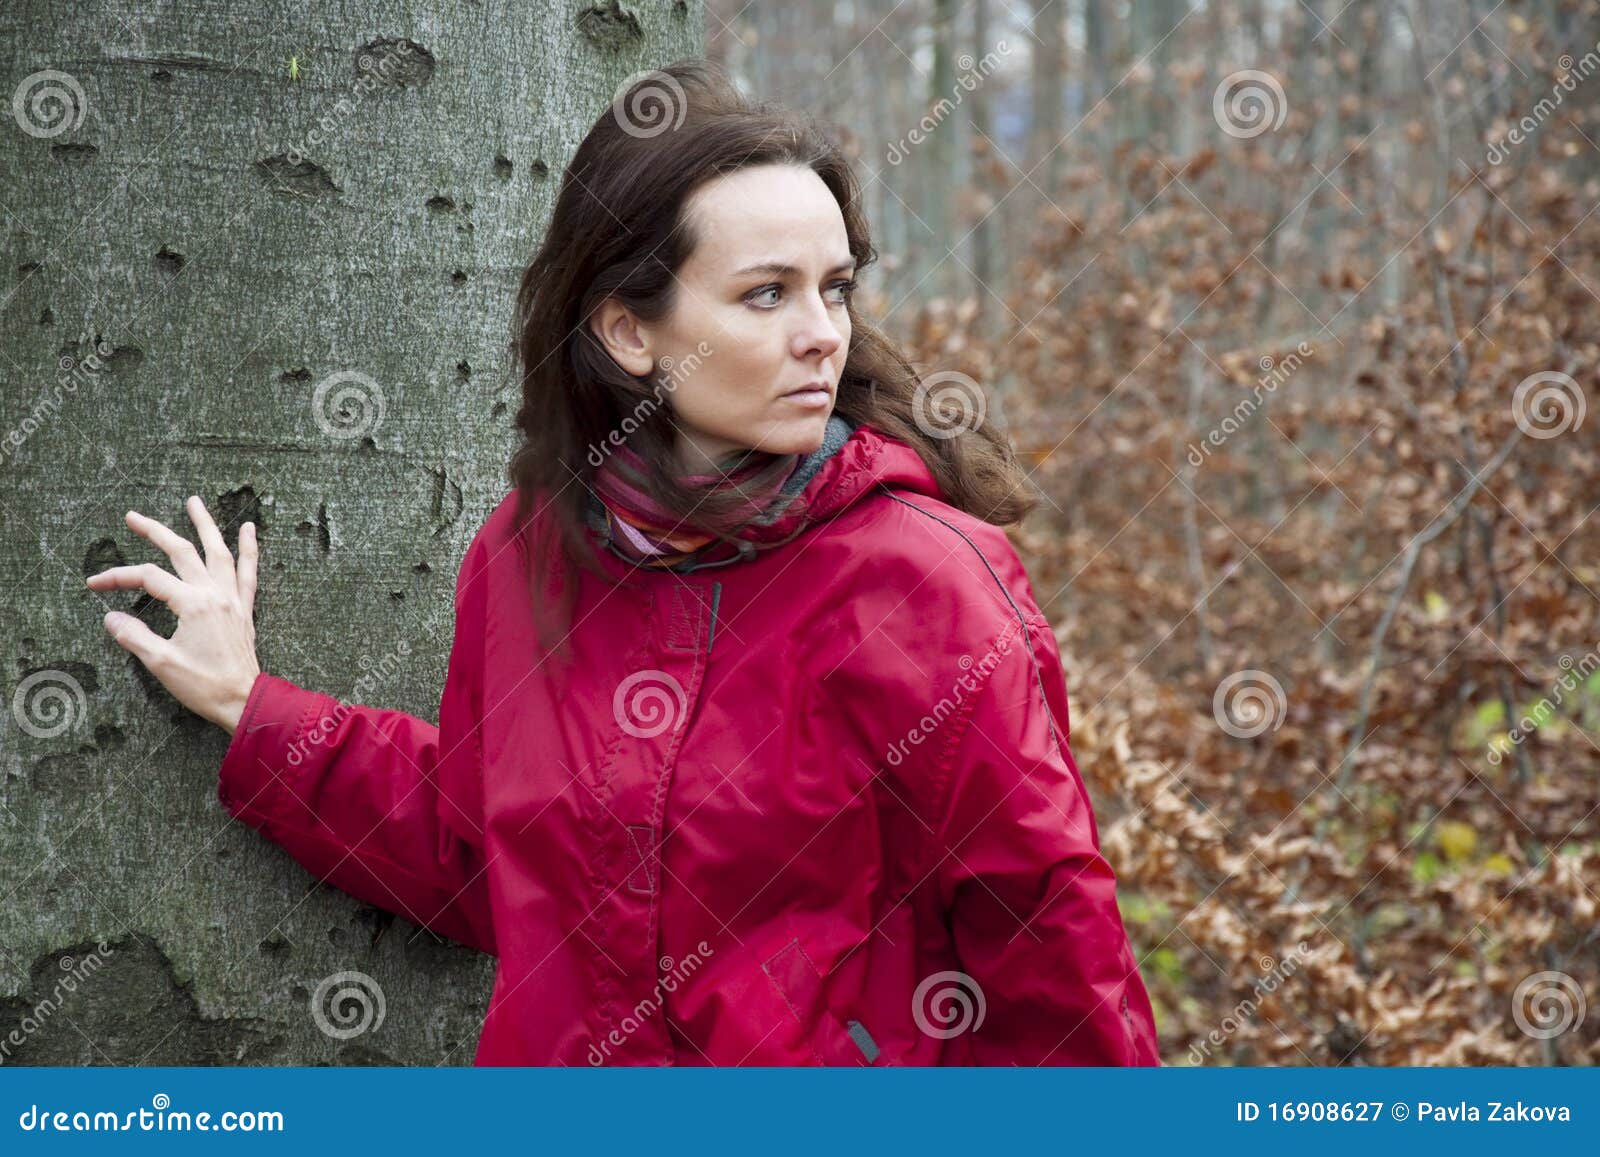 Woman by a tree stock image. Image of relaxing, thoughtful - 16908627